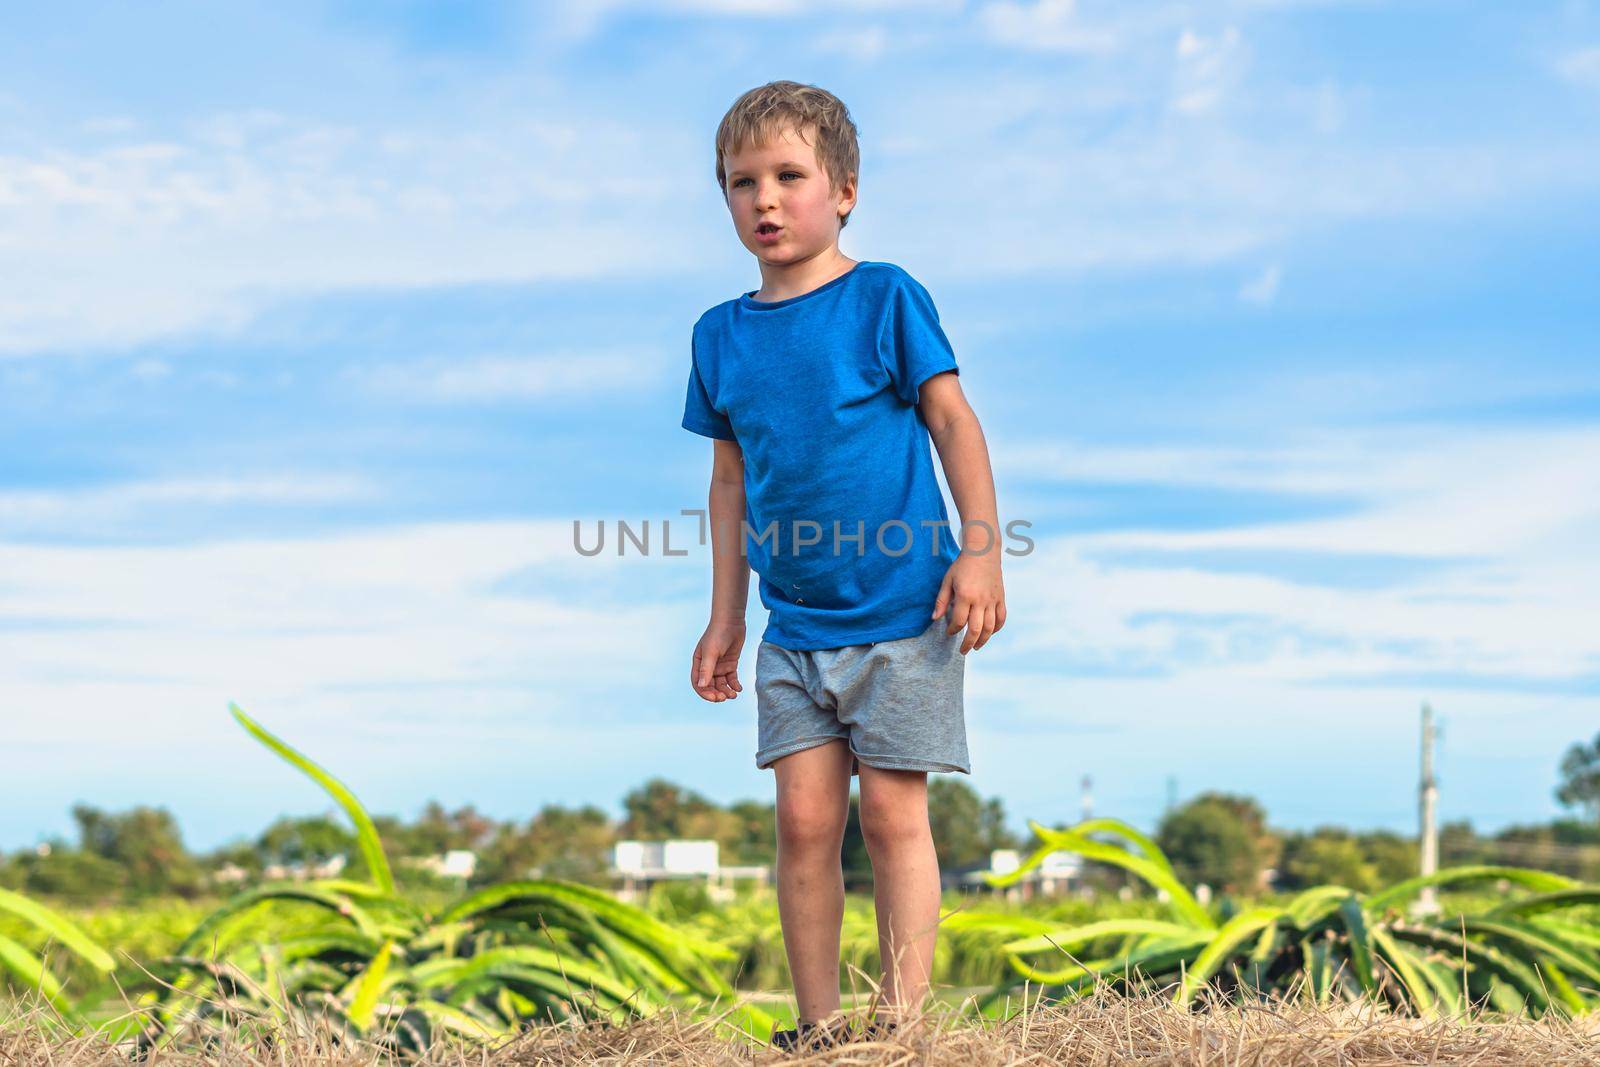 Front view Boy stand on haystack bales hay, wants ready to jump. Clear blue sky sun day. Outdoor kid children summer leisure activities. Concept happy childhood care countryside air nature.